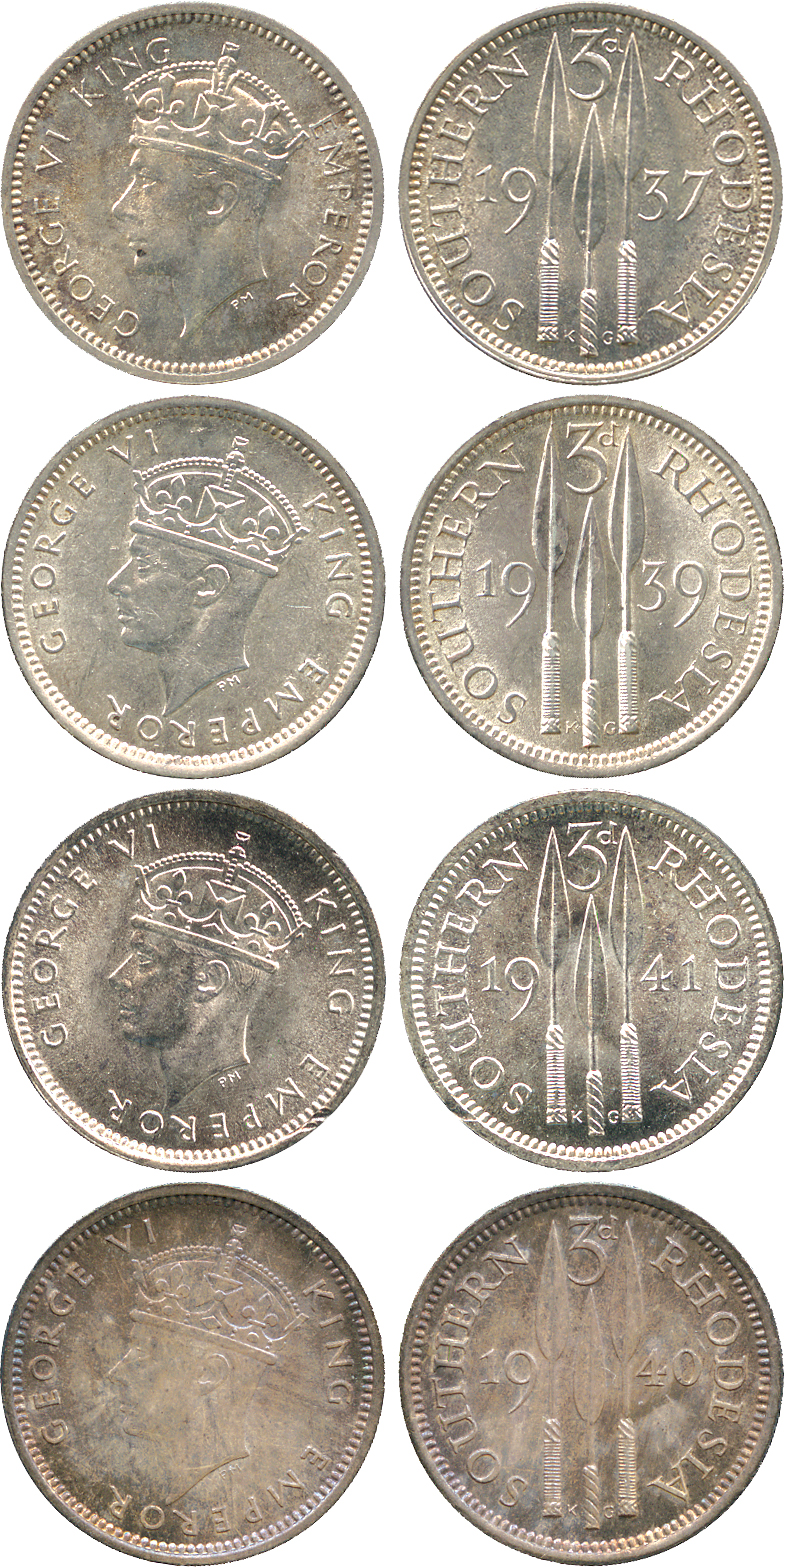 † AFRICA. Rhodesia. Southern Rhodesia. Silver 3-Pence (4), 1937, 1939, 1940, 1941 (KM 9, 16). Second